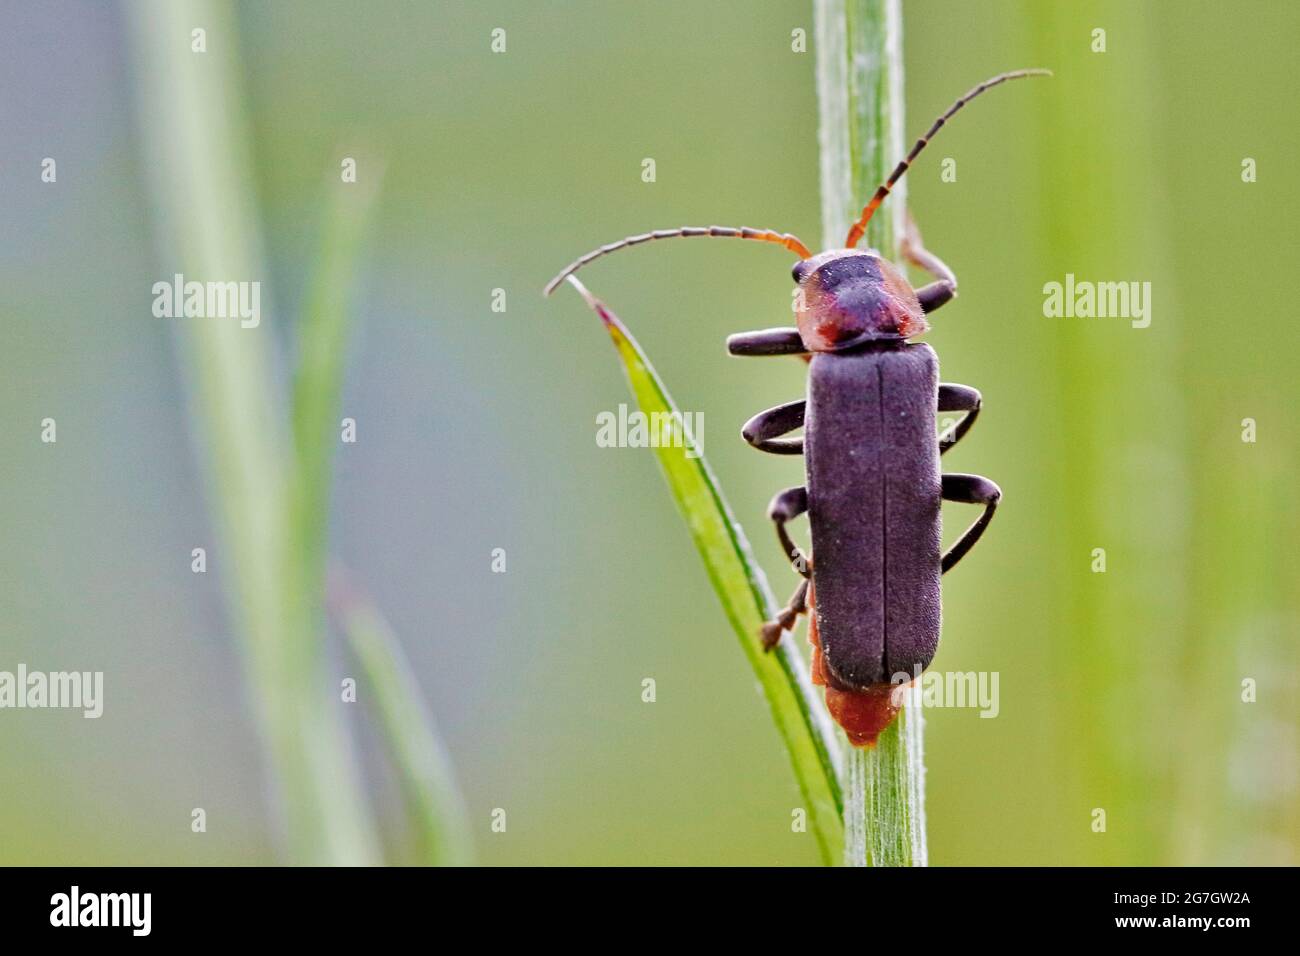 common cantharid, common soldier beetle (Cantharis fusca), sitting on a blade of grass, Germany, North Rhine-Westphalia Stock Photo